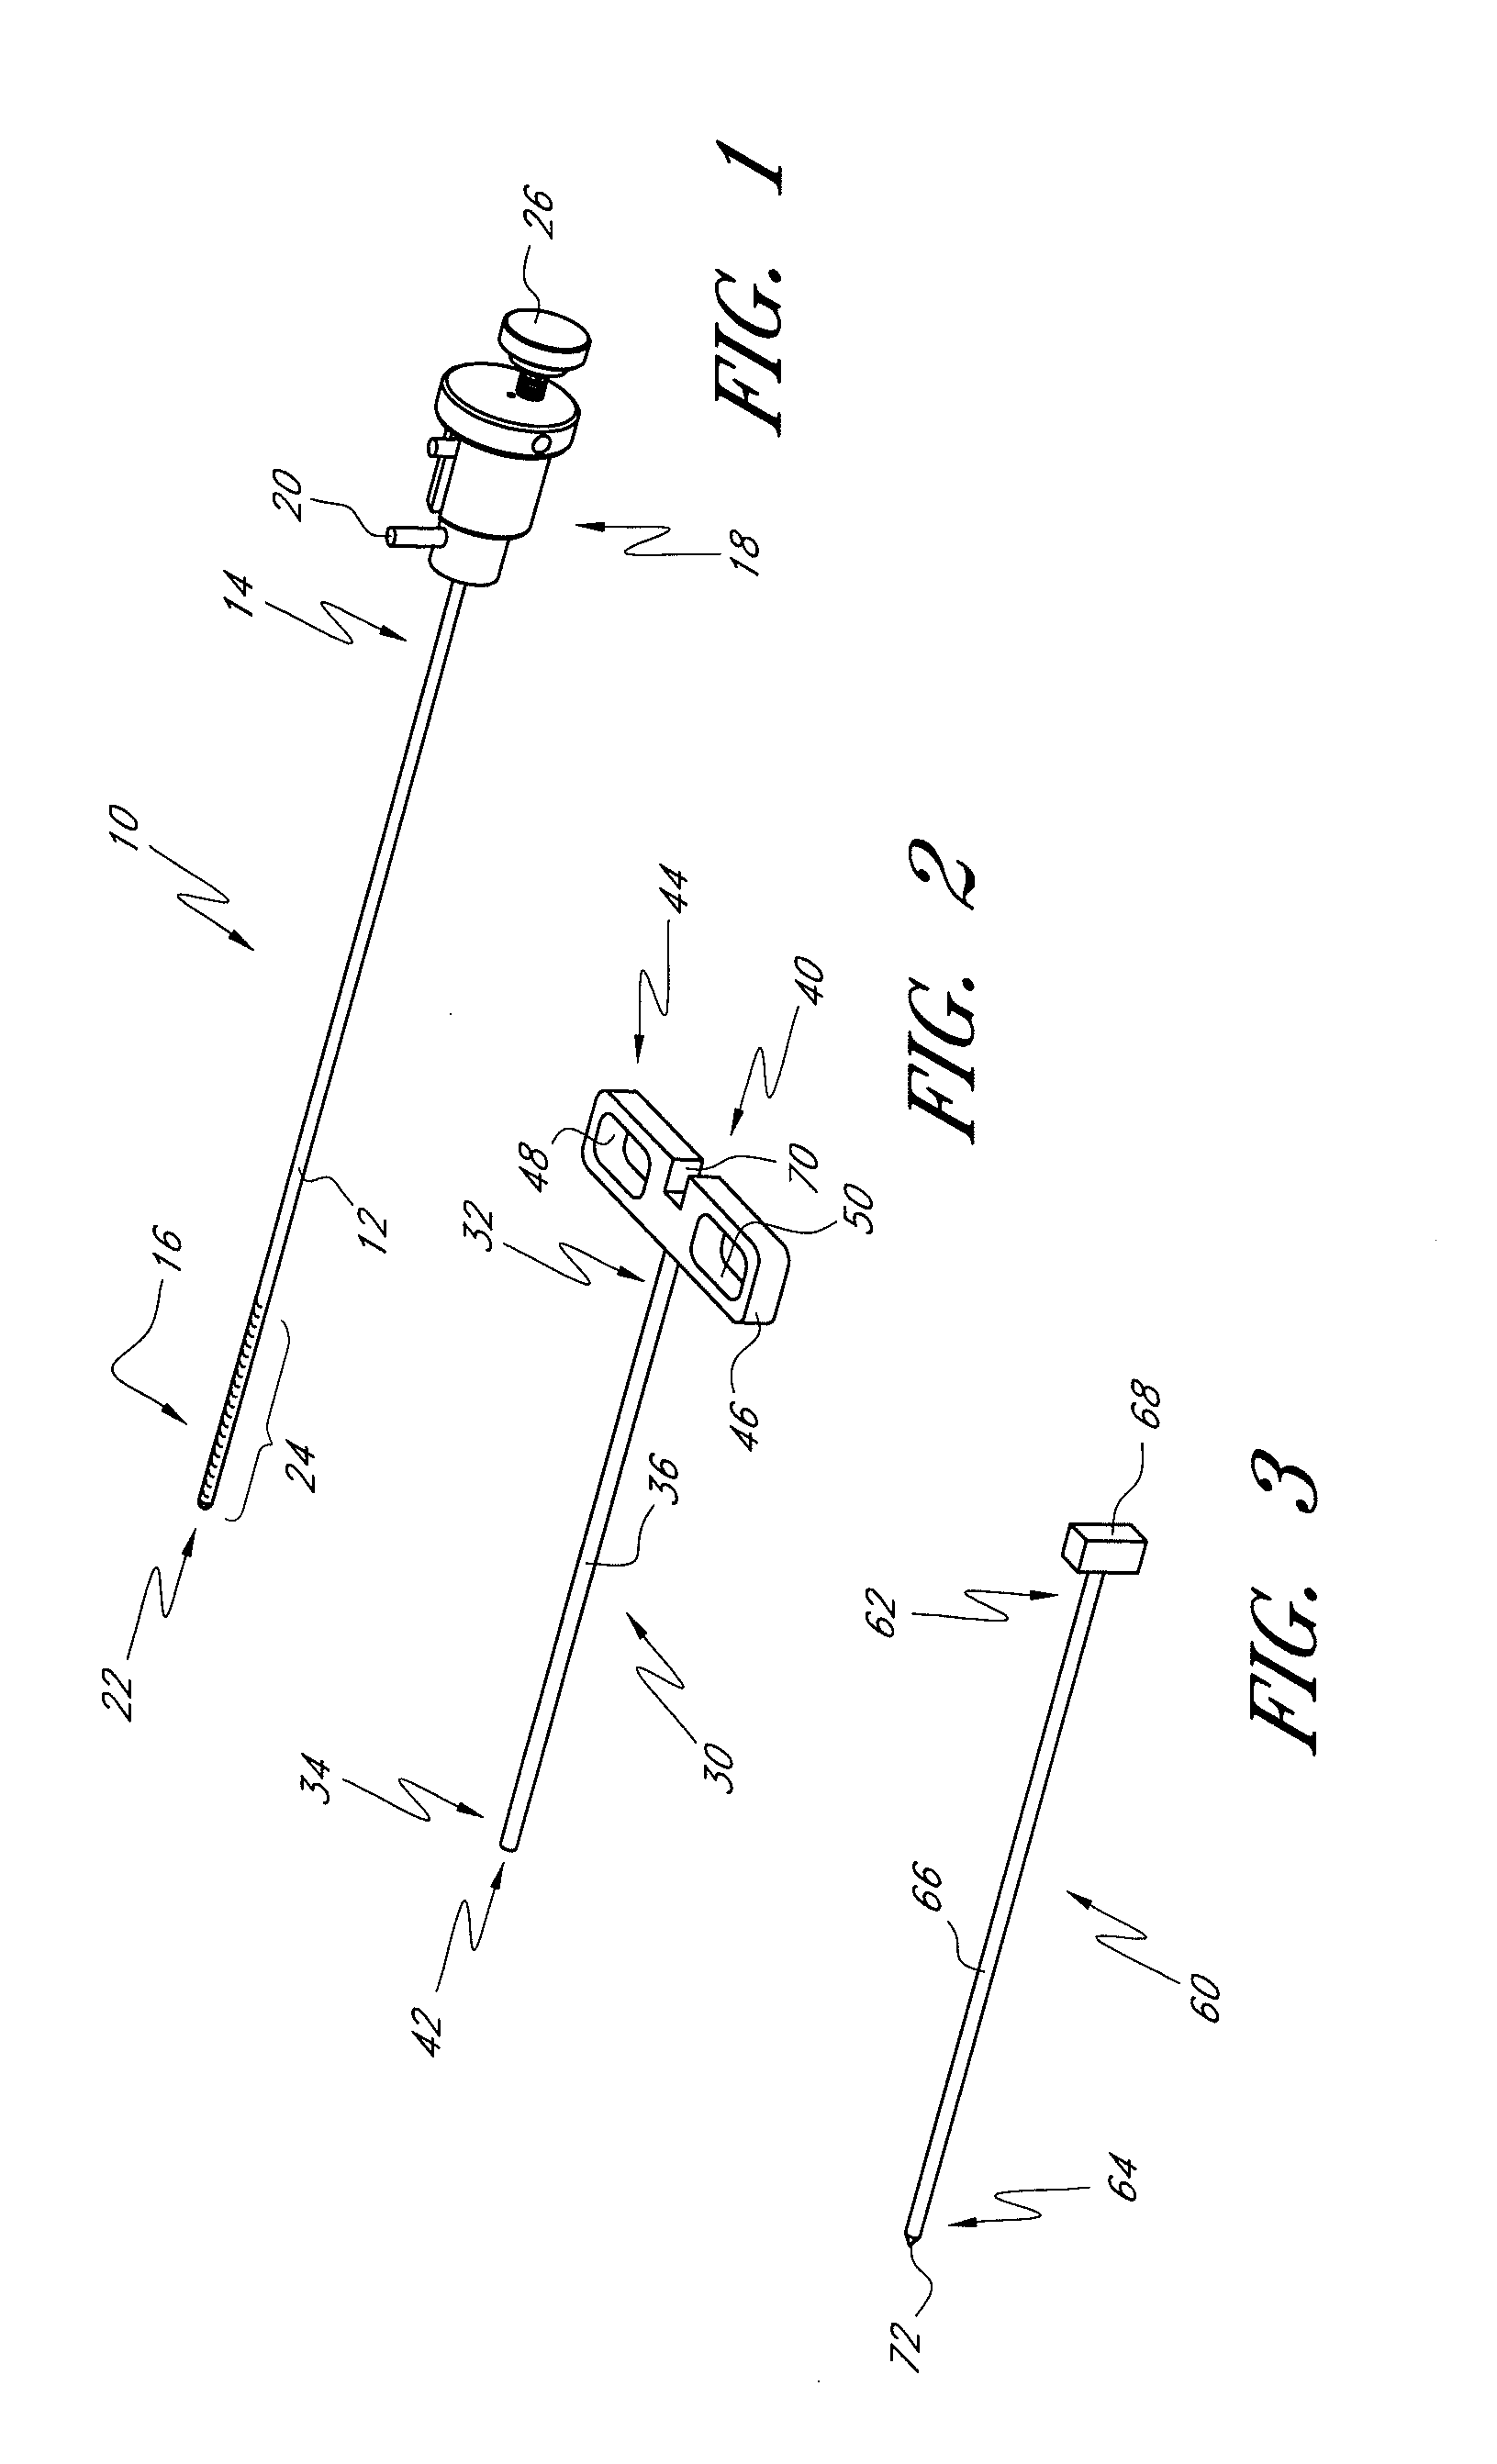 Steerable vertebroplasty system with a plurality of cavity creation elements